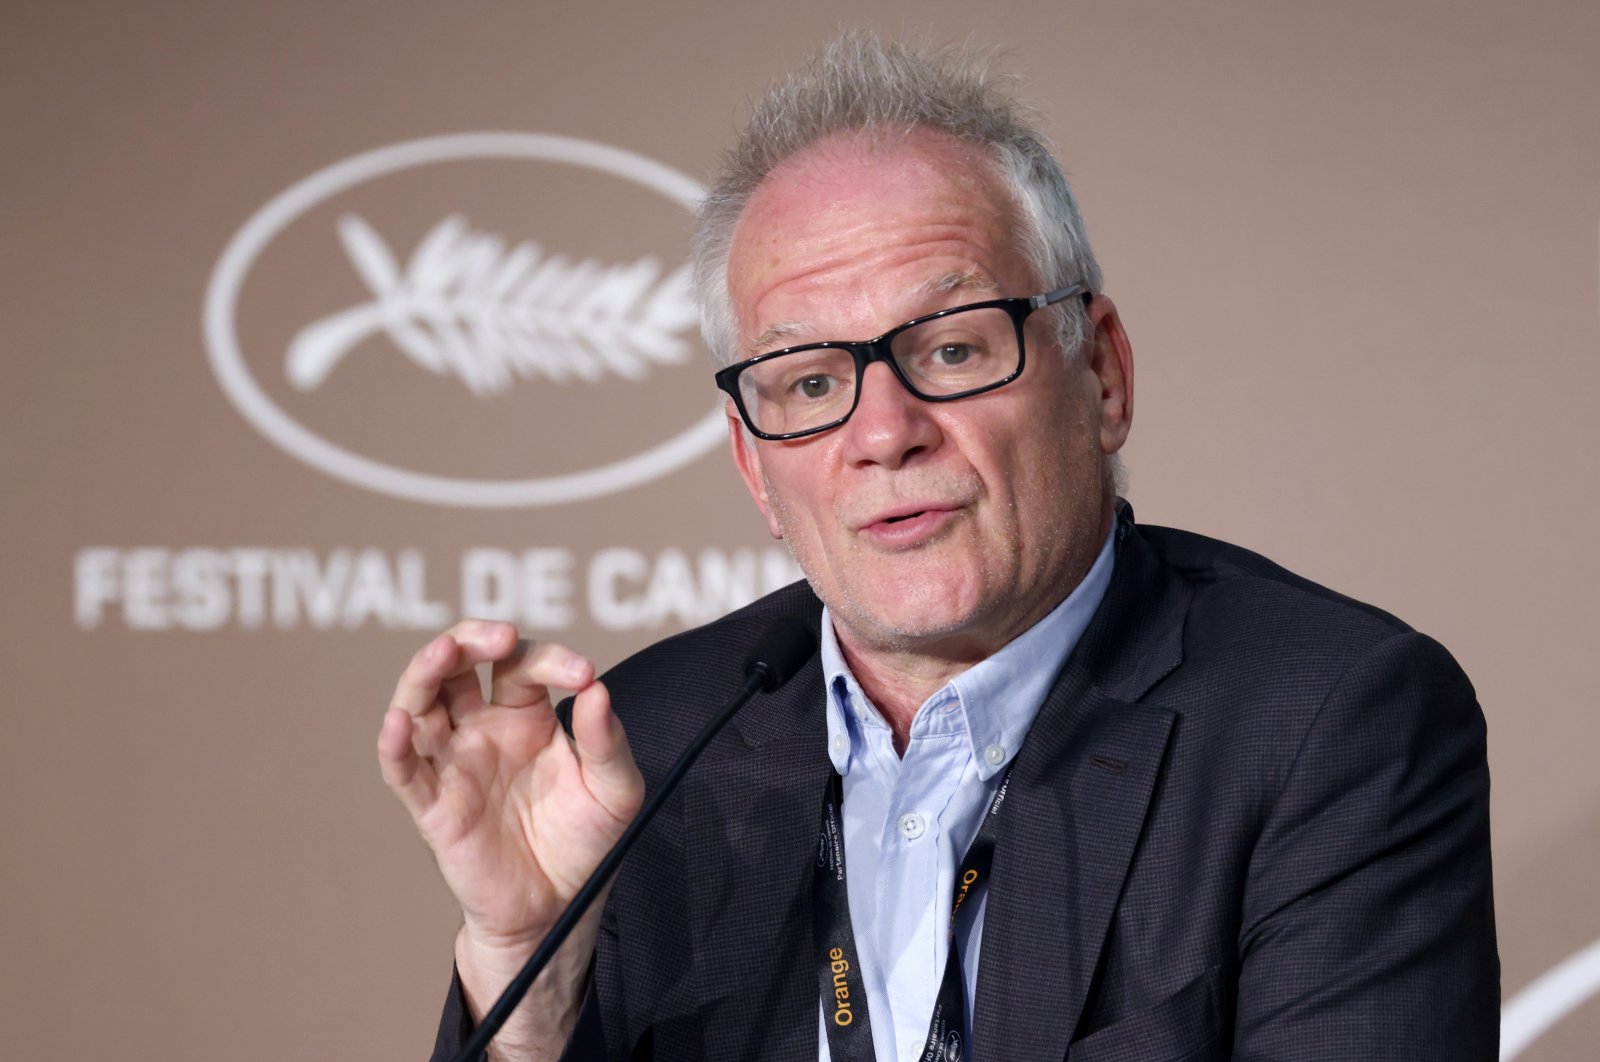 Cannes Film festival general delegate Thierry Fremaux gestures as he speaks during a news conference on the eve of the opening ceremony, Cannes, France, July 5, 2021. (Reuters Photo)